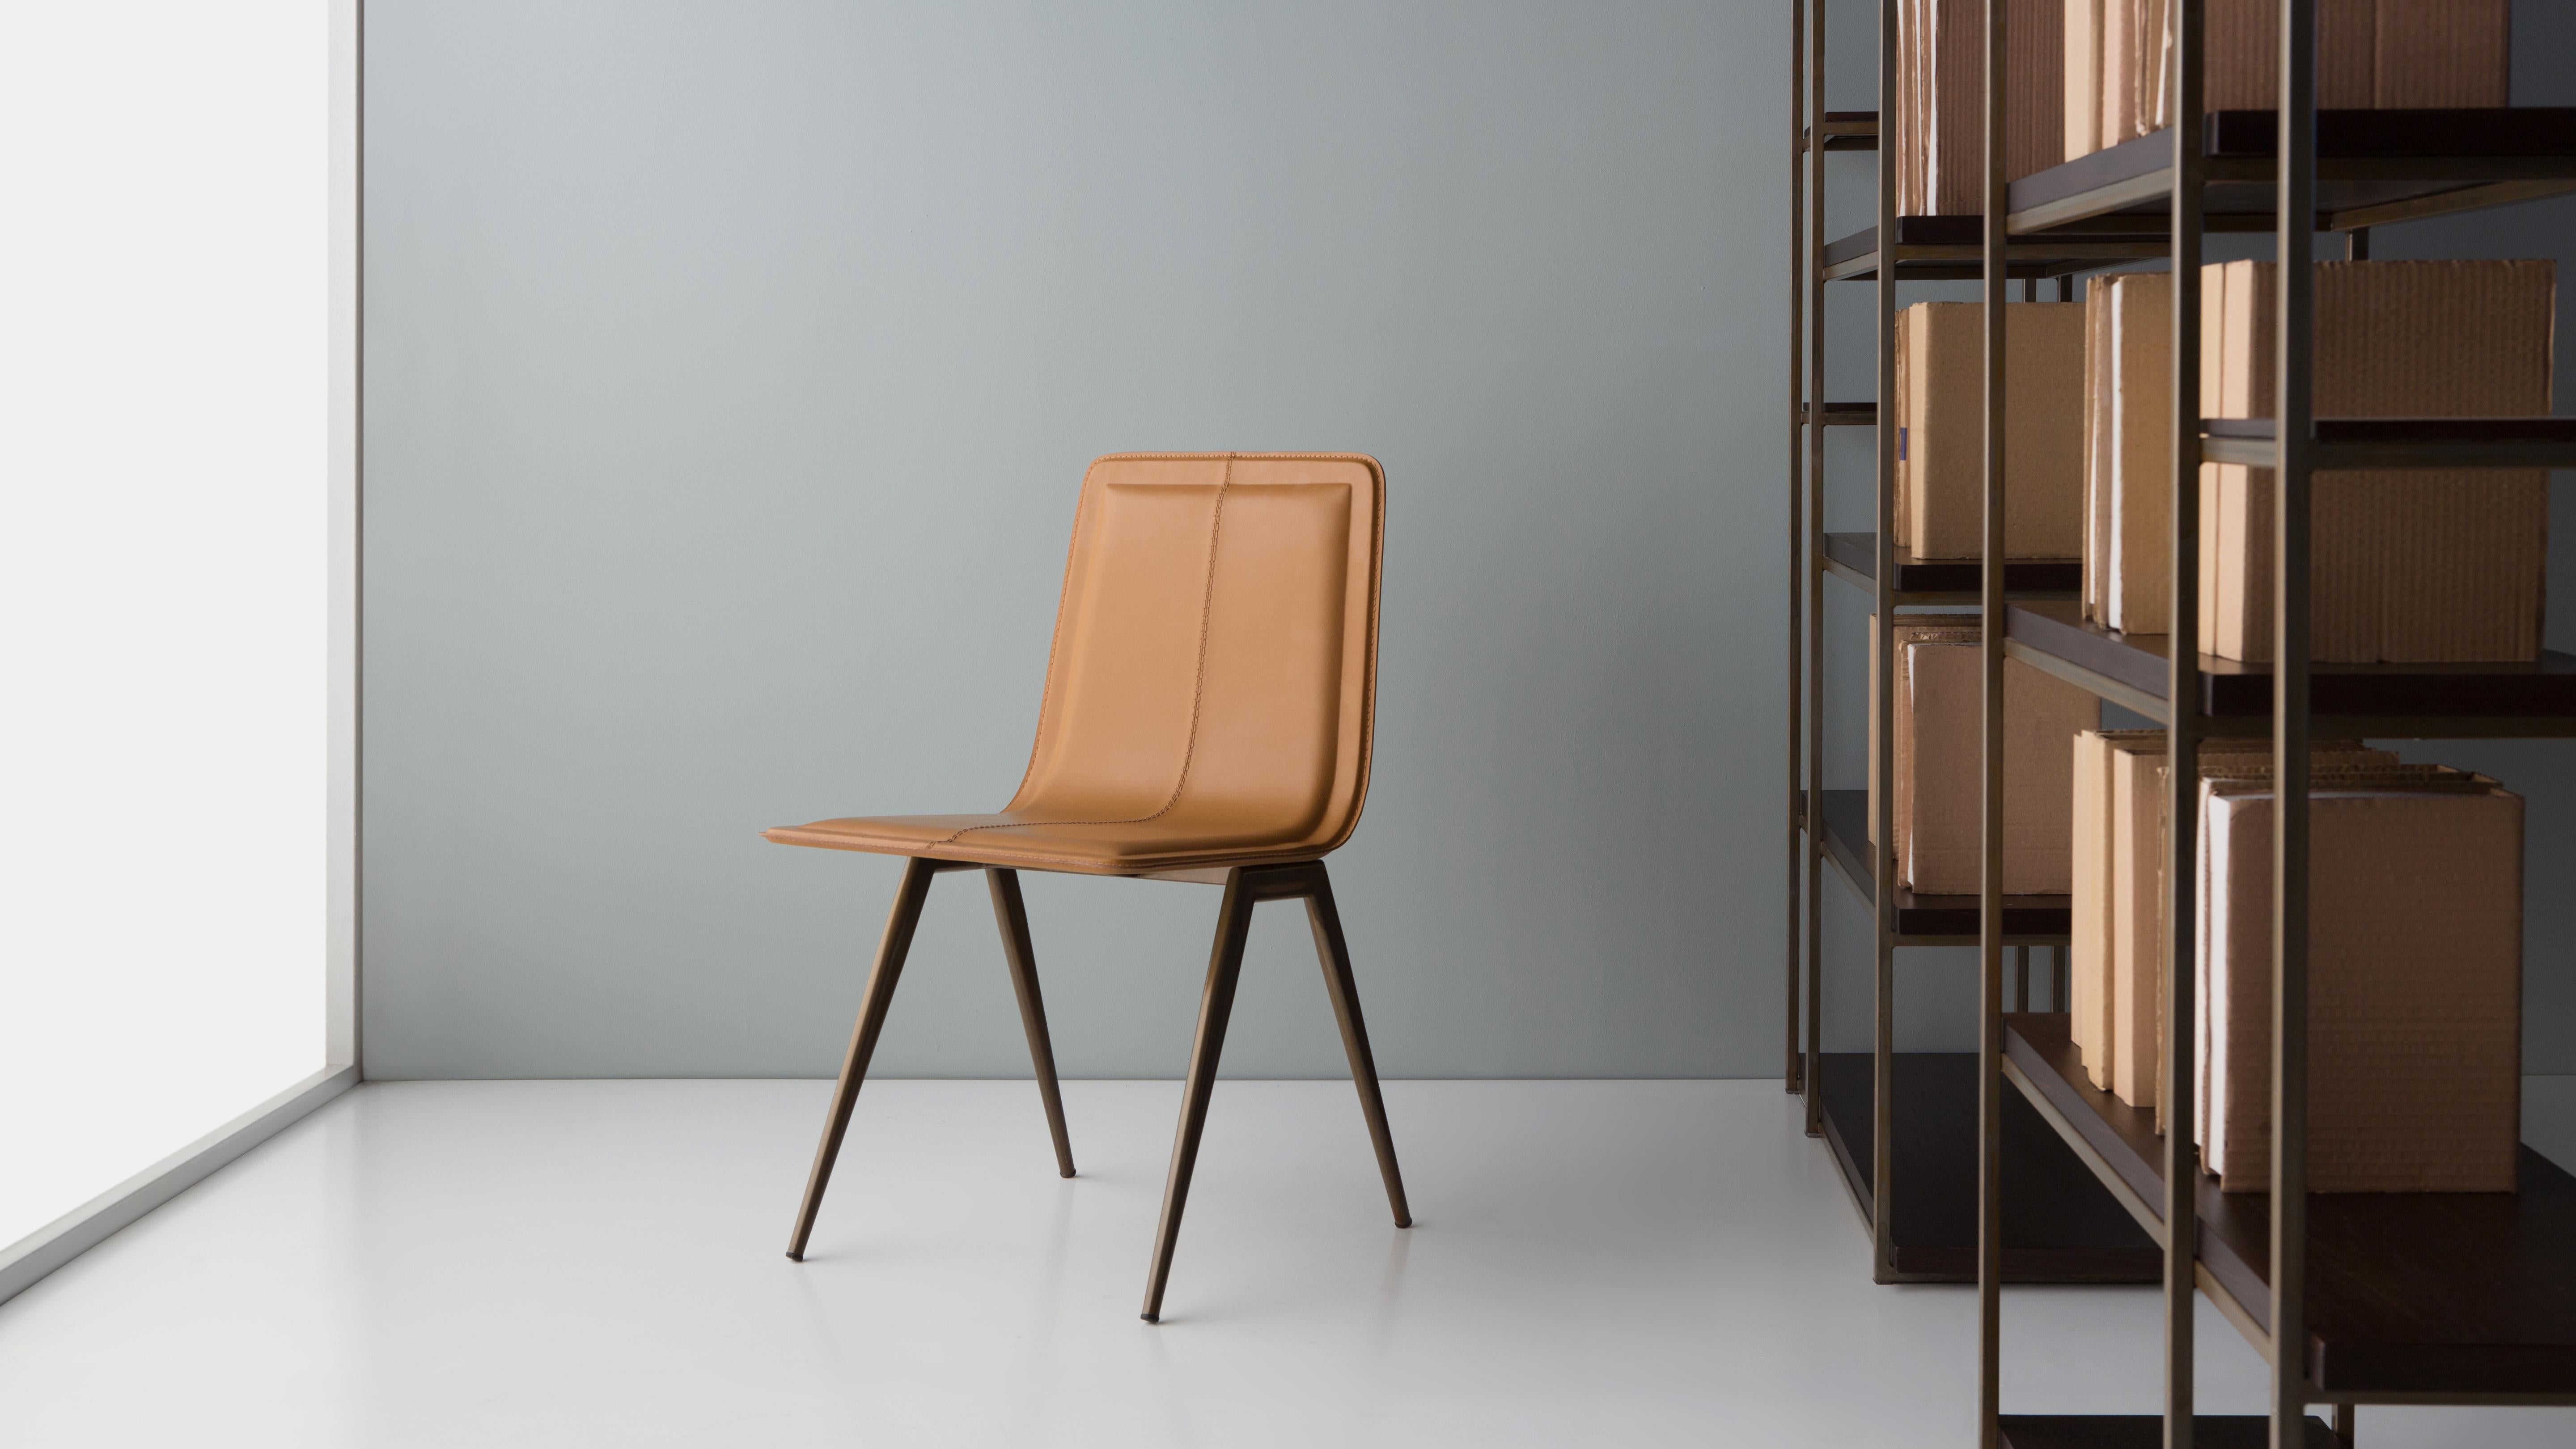 Tecno Chair by Doimo Brasil
Dimensions: W 46 x D 55 x H 83 cm 
Materials: Veneer, Natural Leather.


With the intention of providing good taste and personality, Doimo deciphers trends and follows the evolution of man and his space. To this end, it